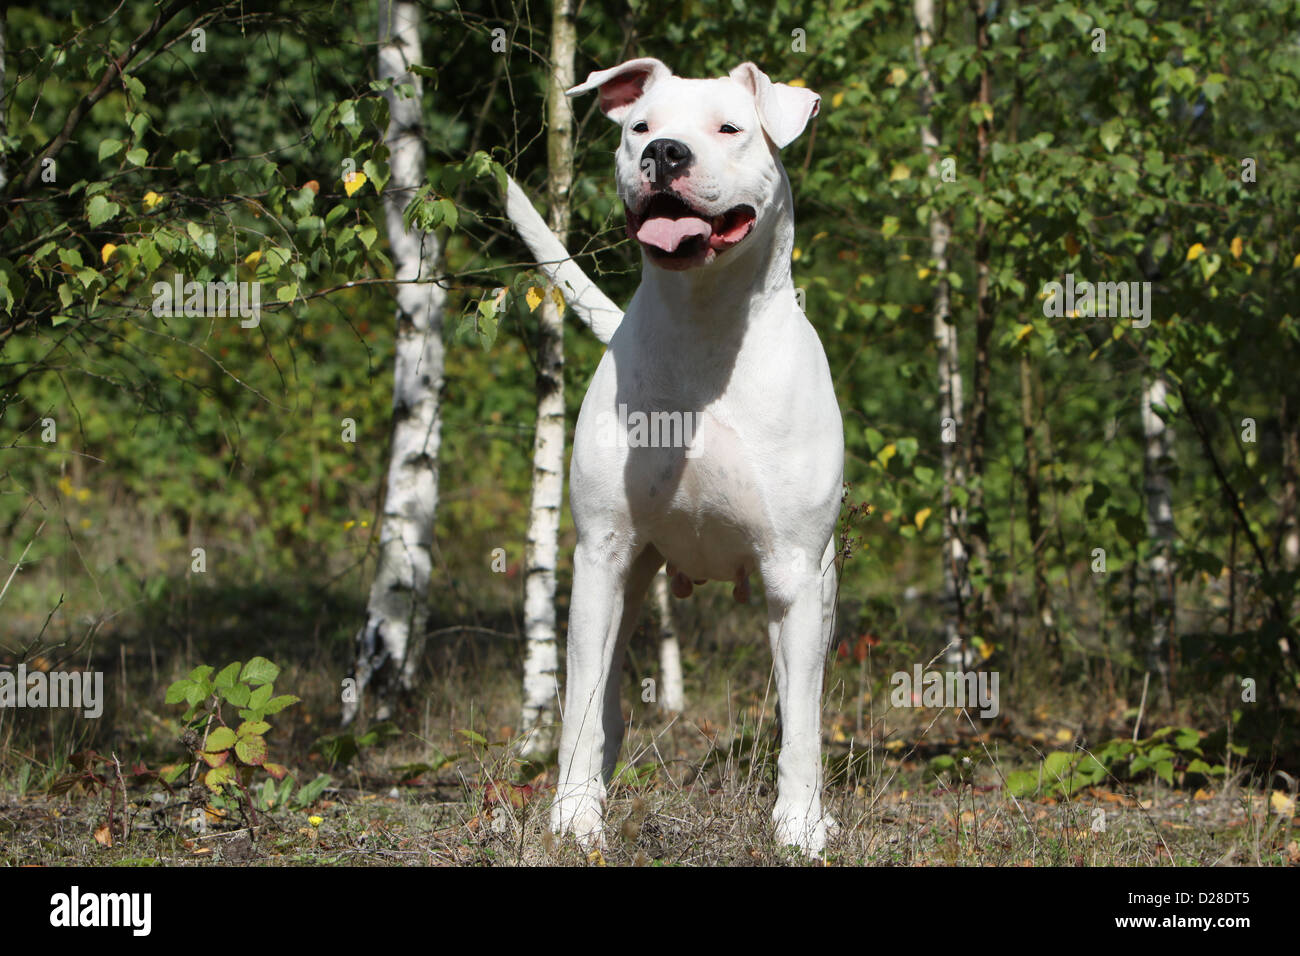 Dog Dogo Argentino / Dogue Argentin (natural ears) adult standing in a forest Stock Photo